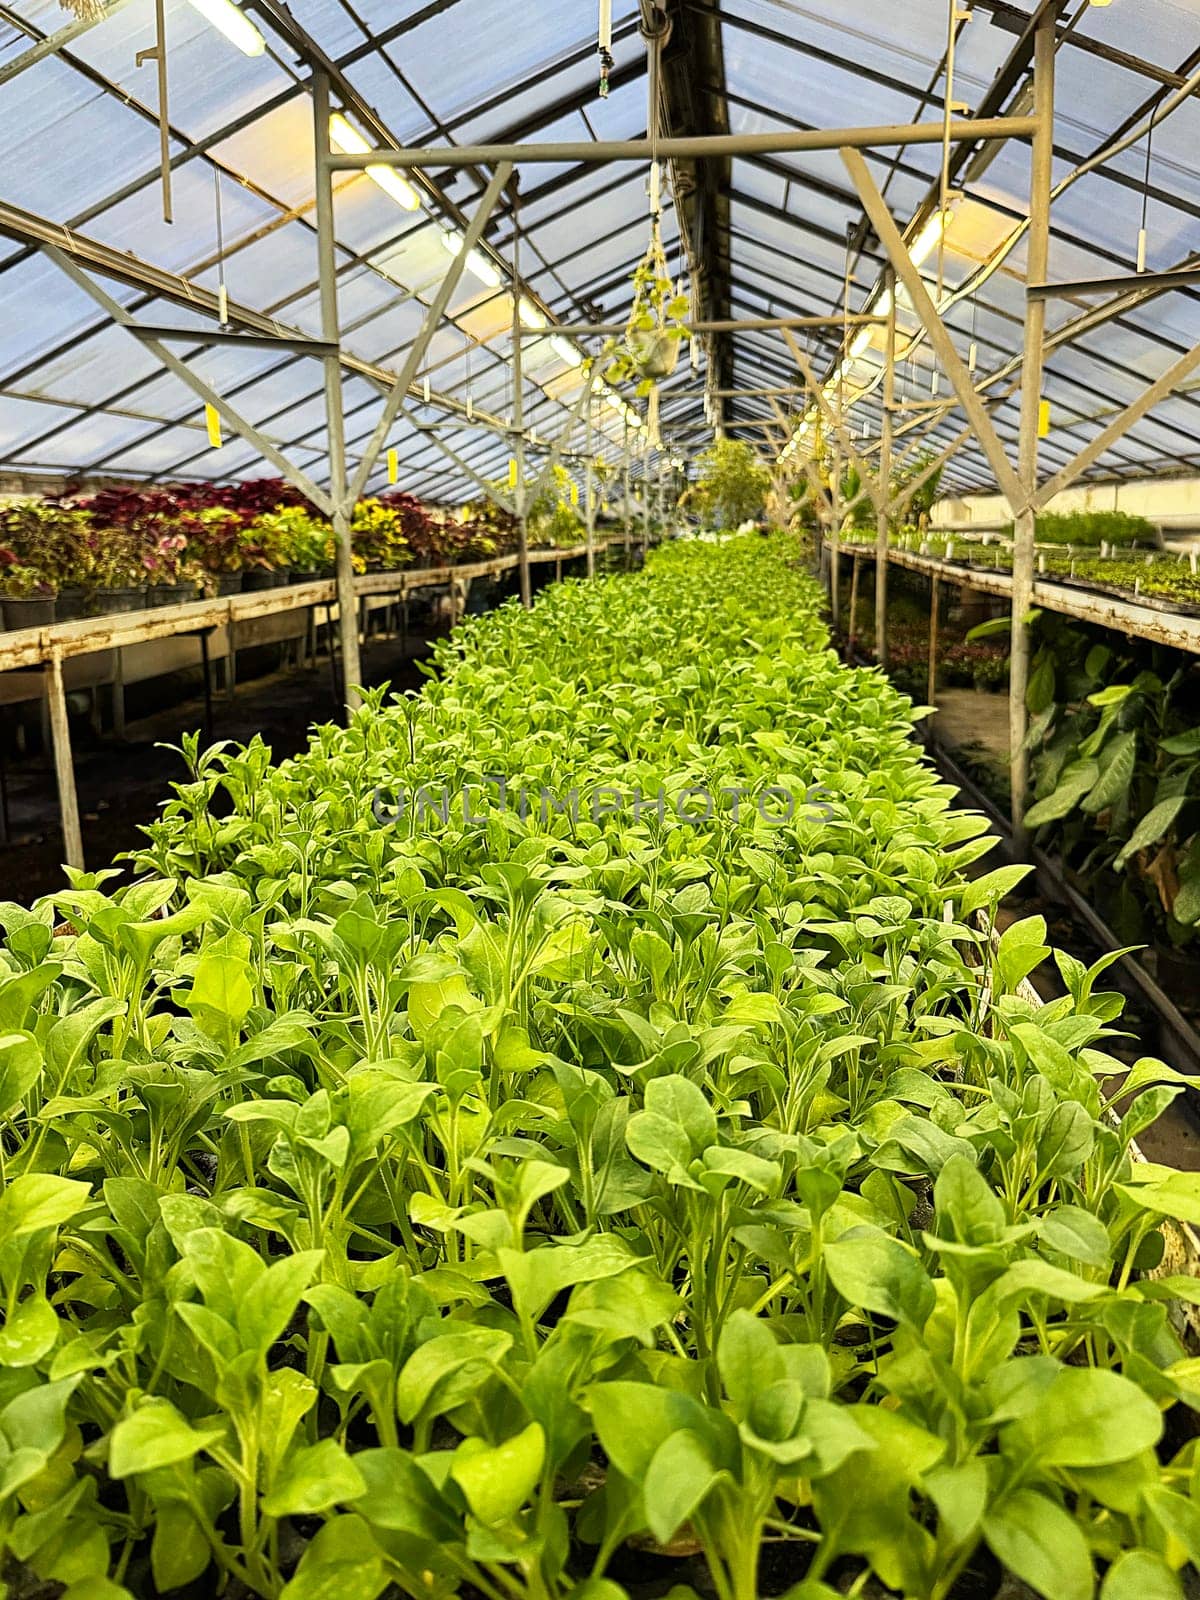 seedlings of ornamental plants in an industrial greenhouse, perspective view by Annado